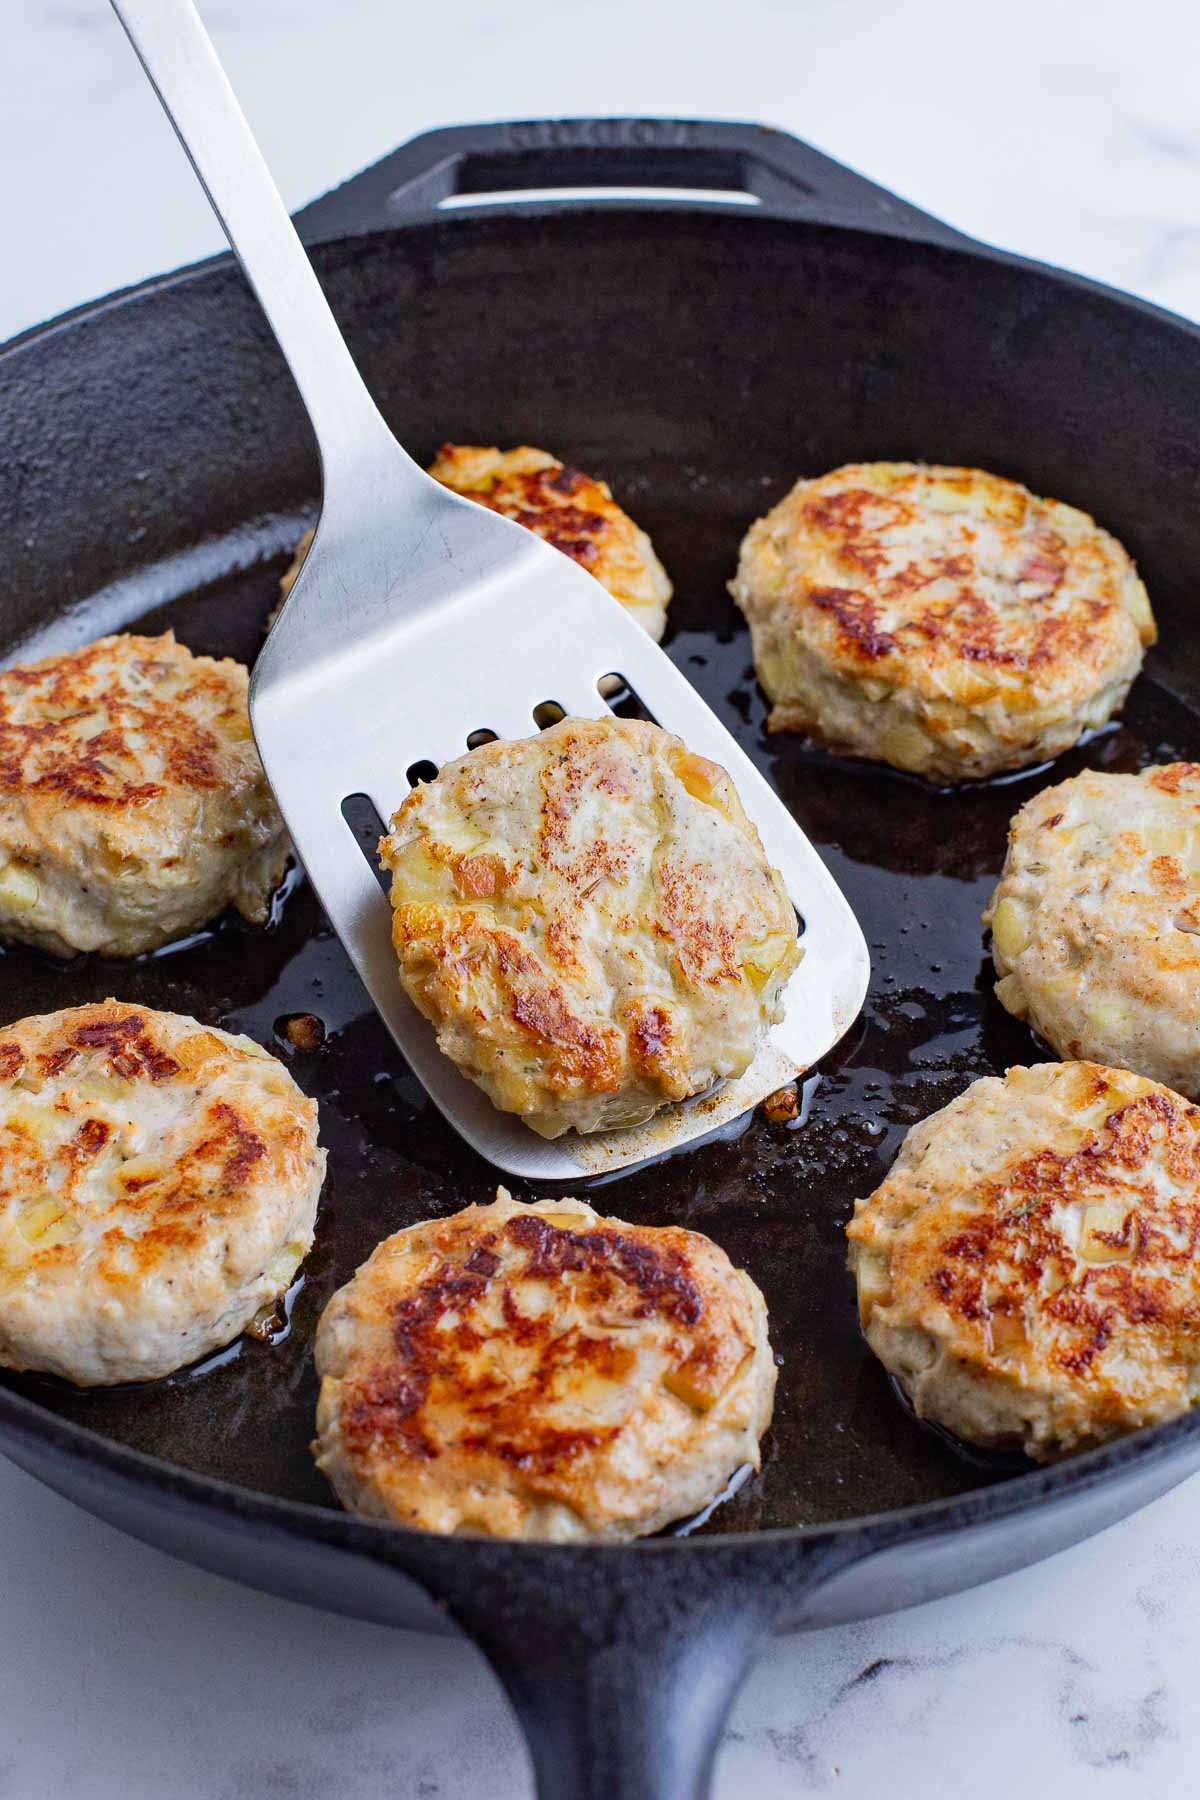 A spatula flips the sausage patties during cooking.